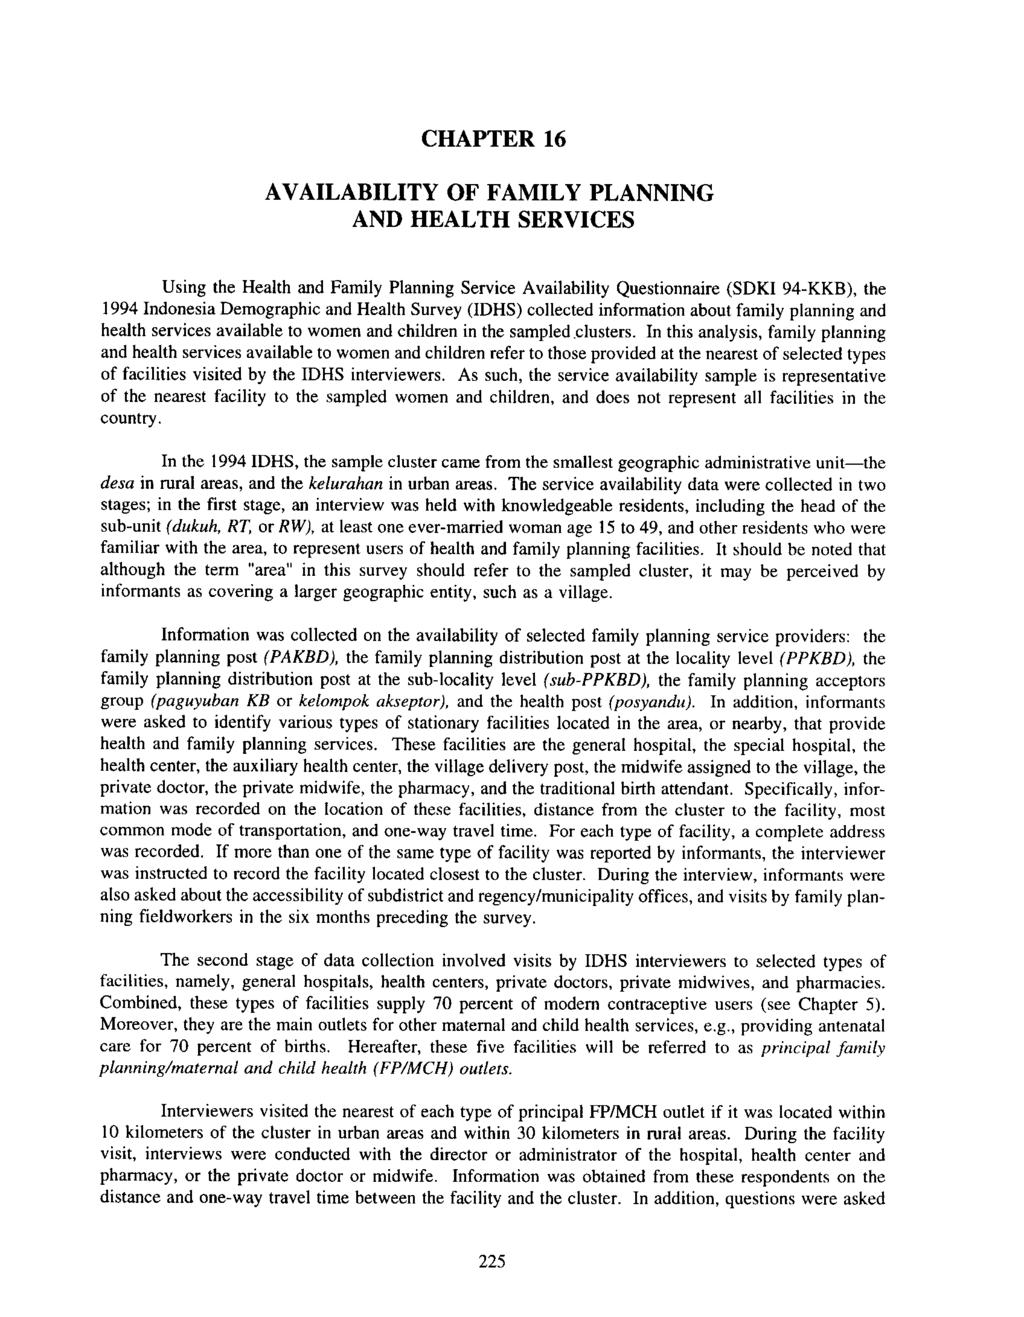 CHAPTER 16 AVAILABILITY OF FAMILY PLANNING AND HEALTH SERVICES Using the Health and Family Planning Service Availability Questionnaire (SDKI 94-KKB), the 1994 Indonesia Demographic and Health Survey